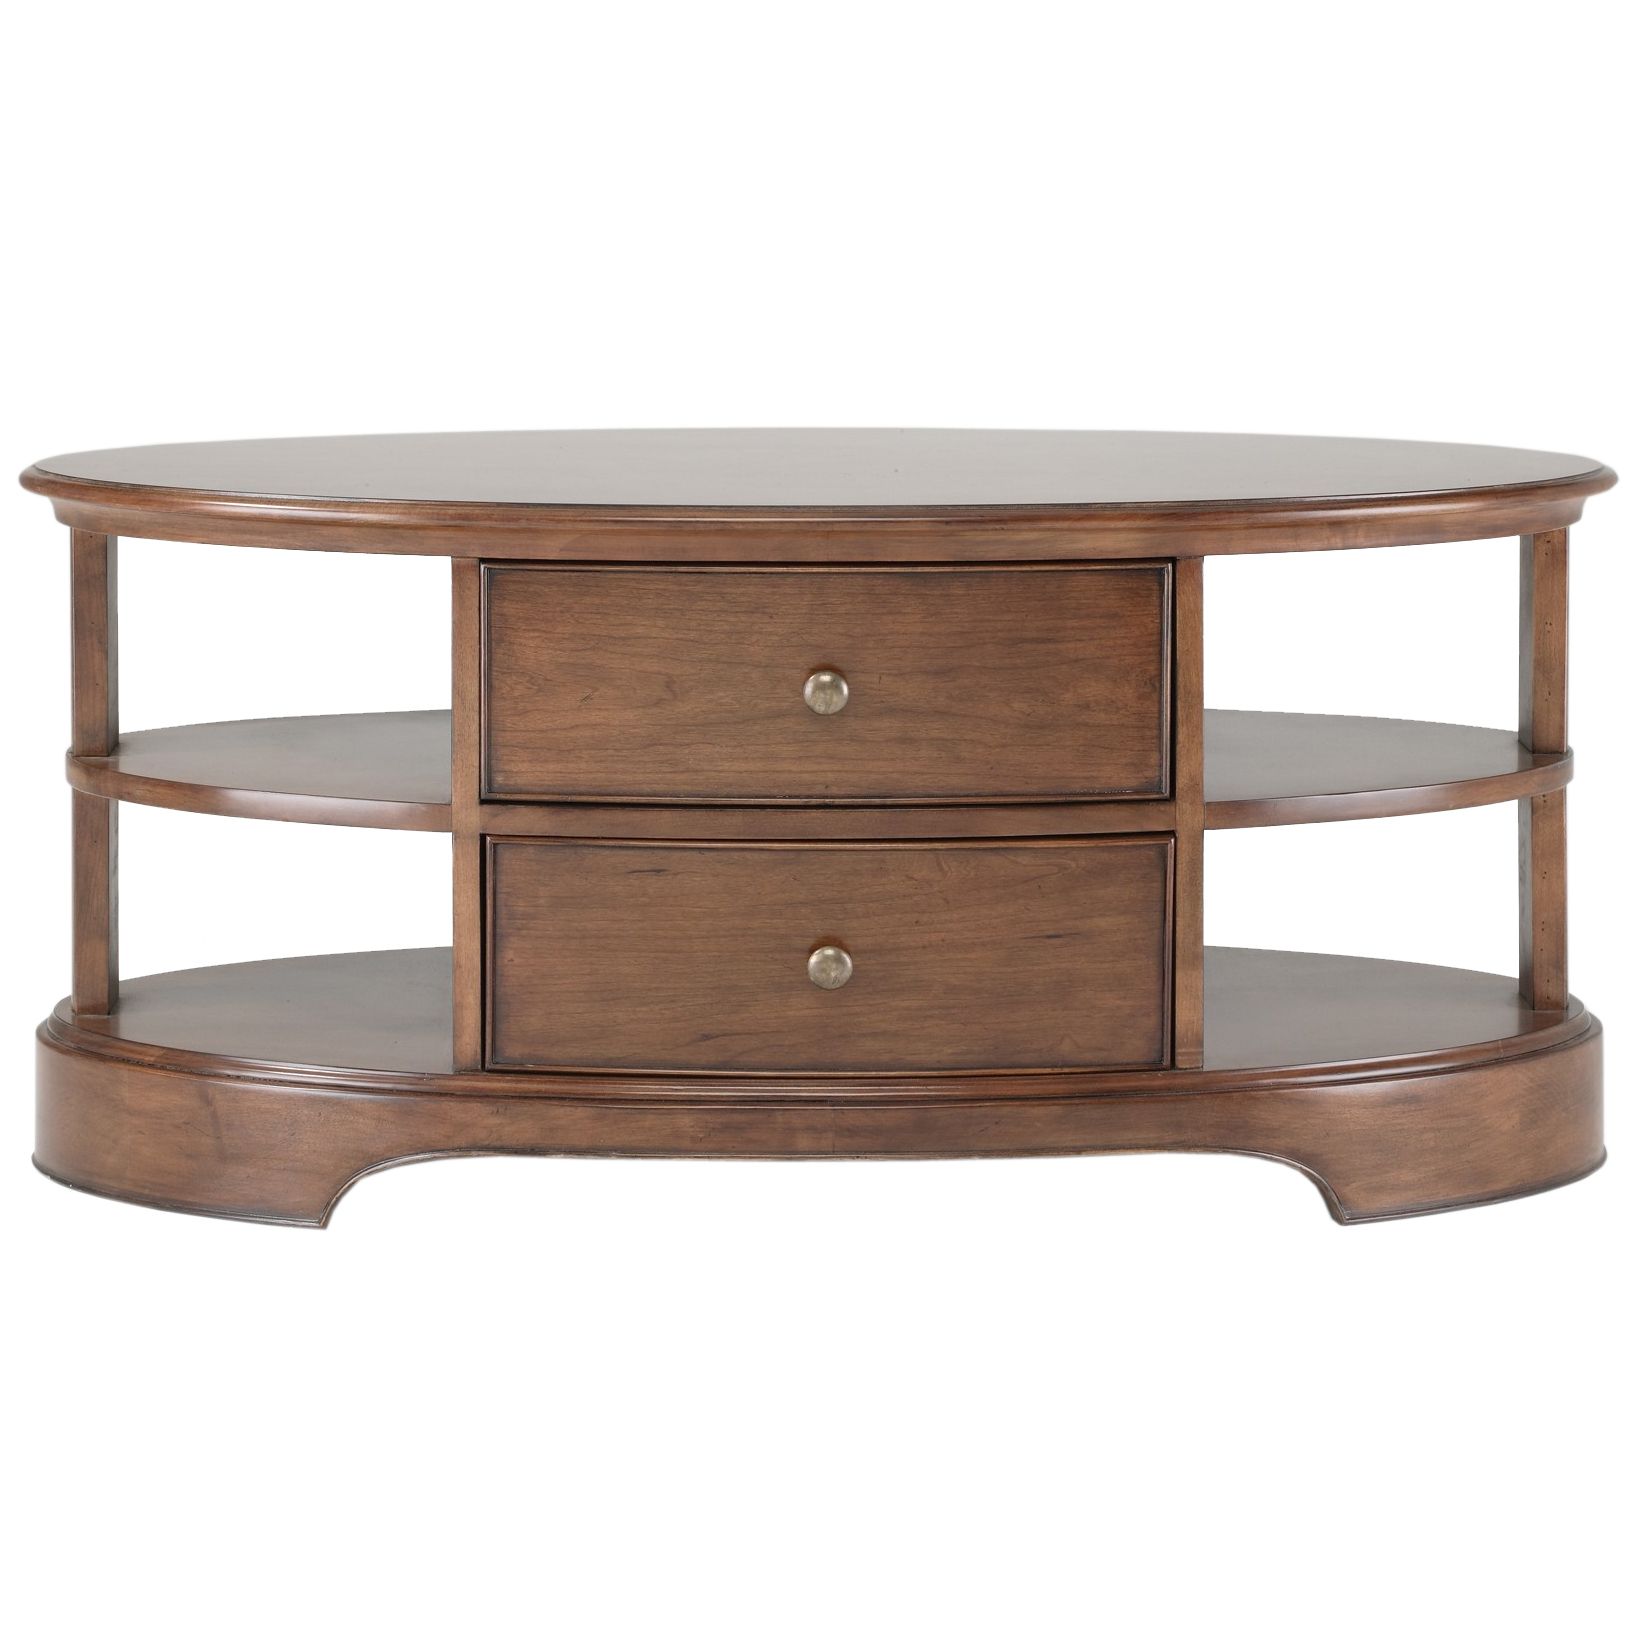 Other Lille Oval Coffee Table